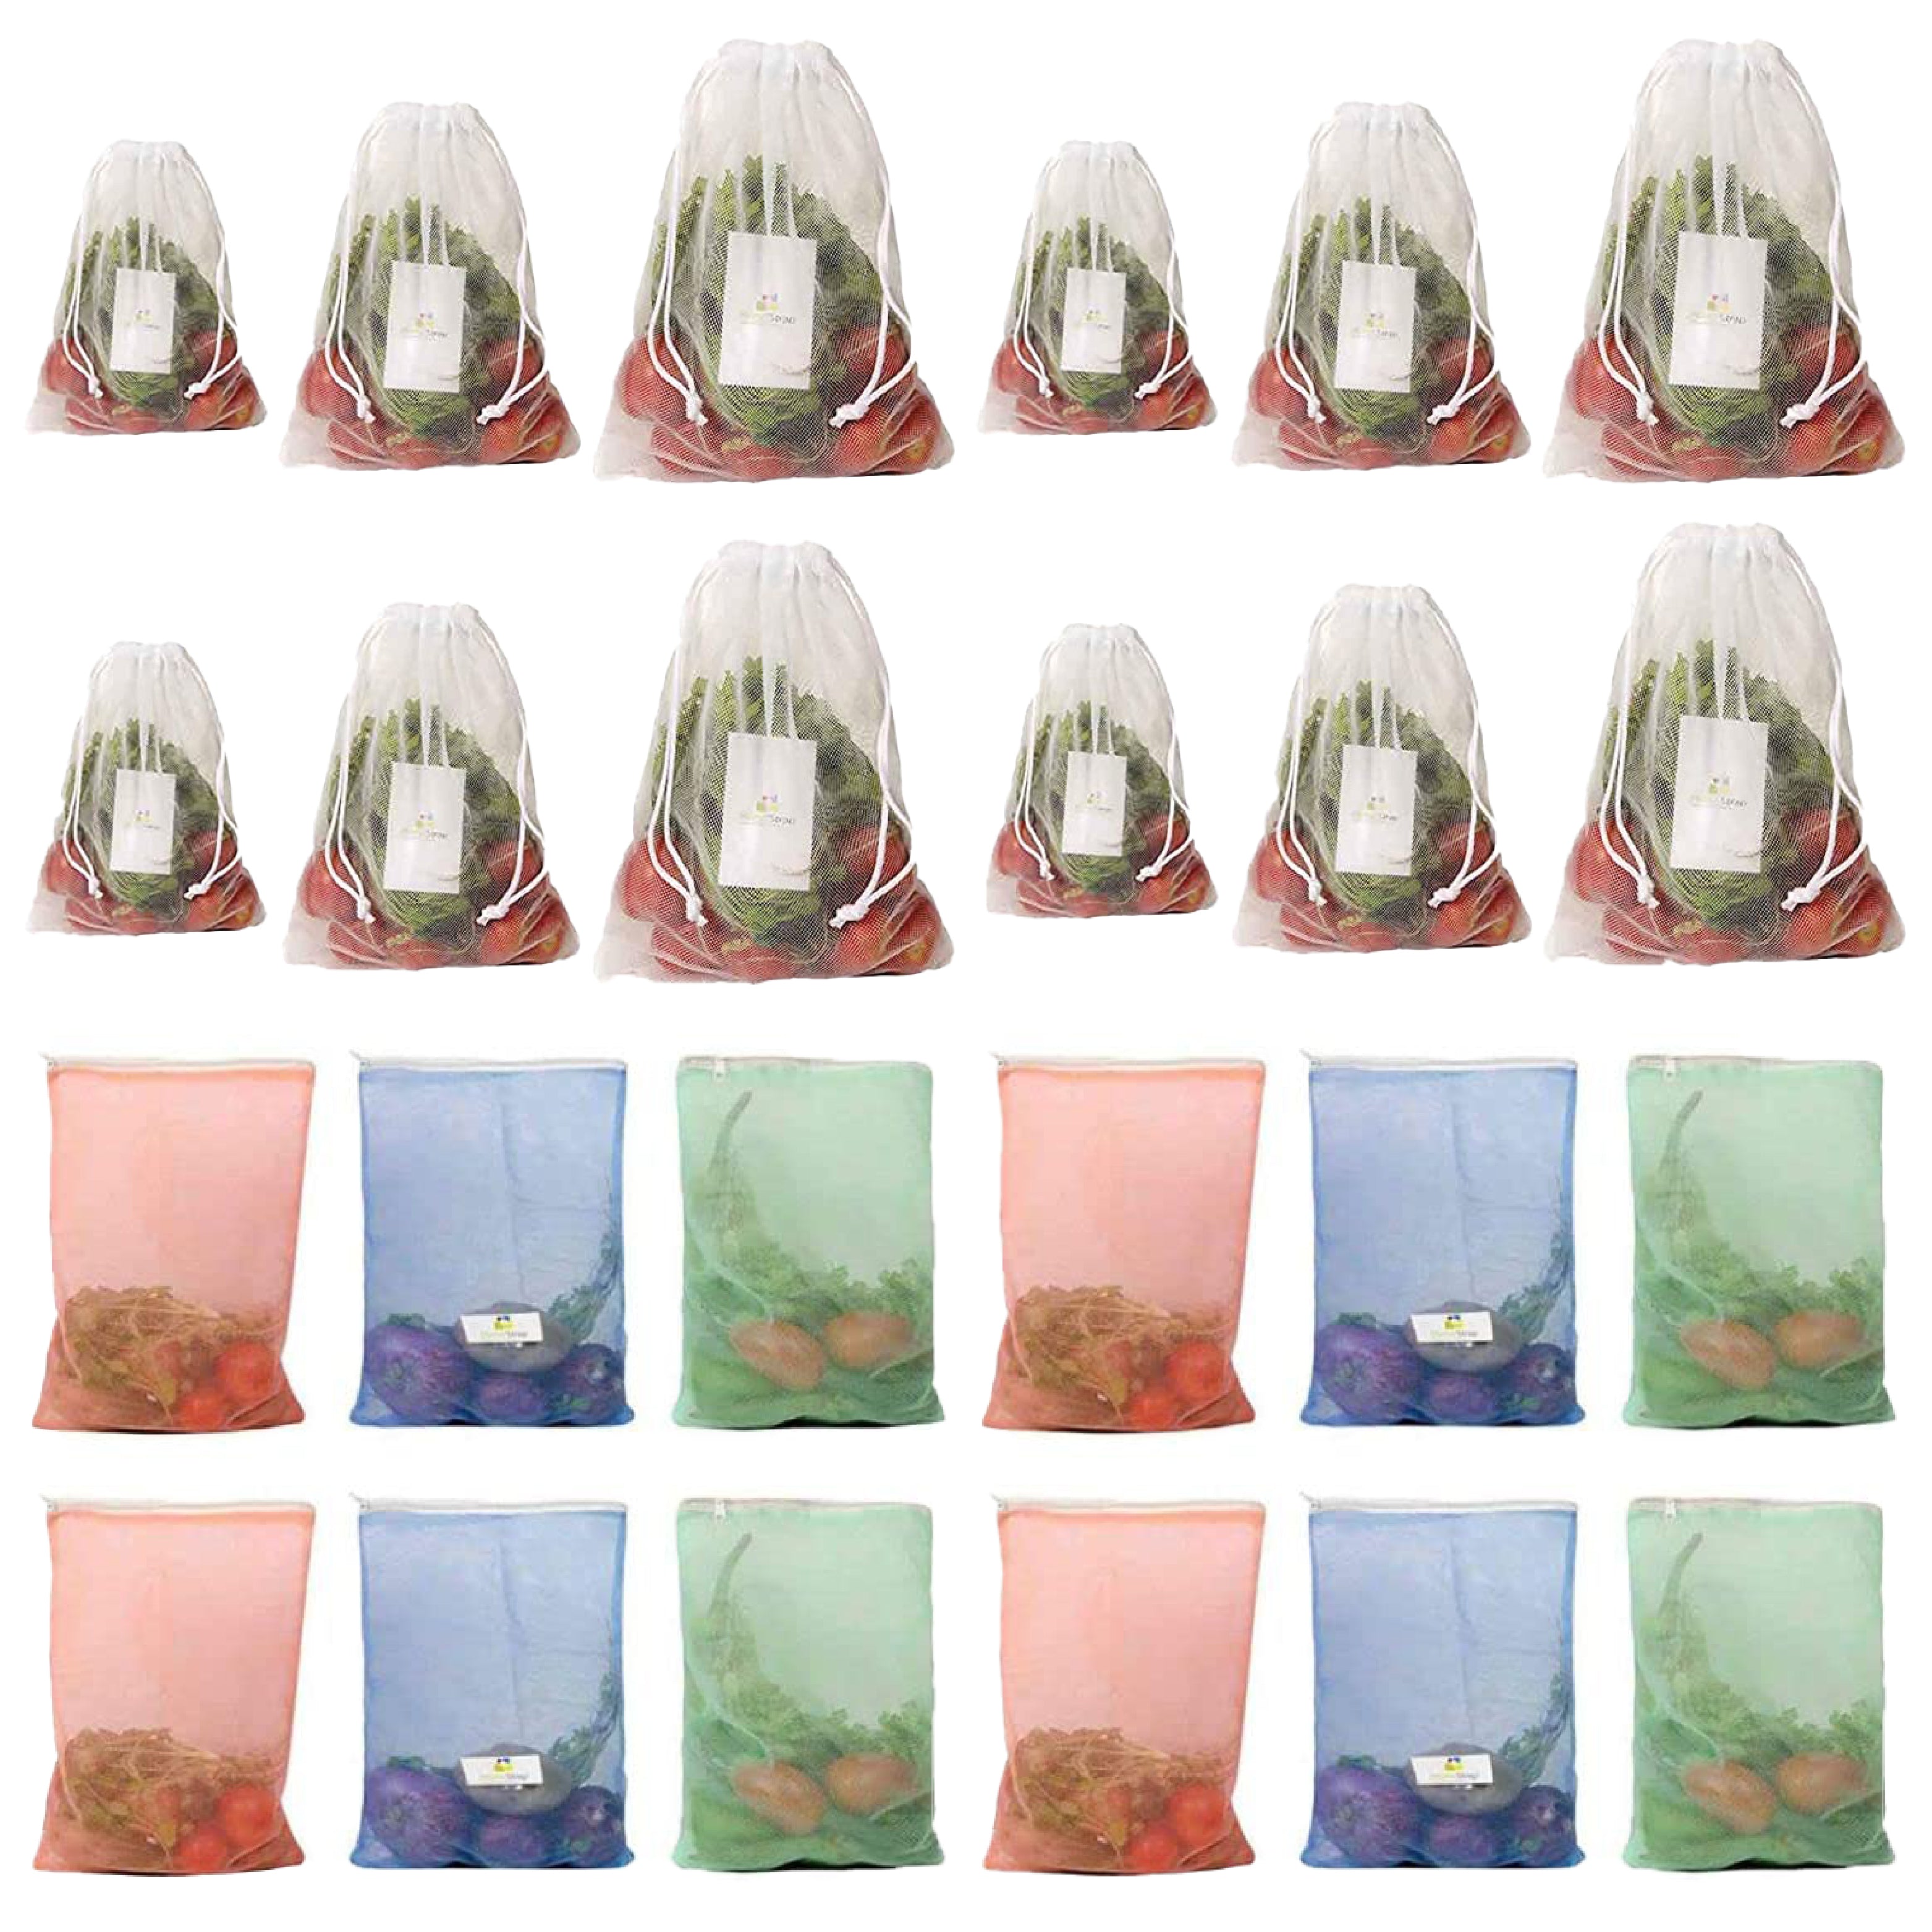 Combo of 12 Reusable Fridge Vegetable bags with Drawstrings and 12 Multicolor Vegetable Pouches with Zipper